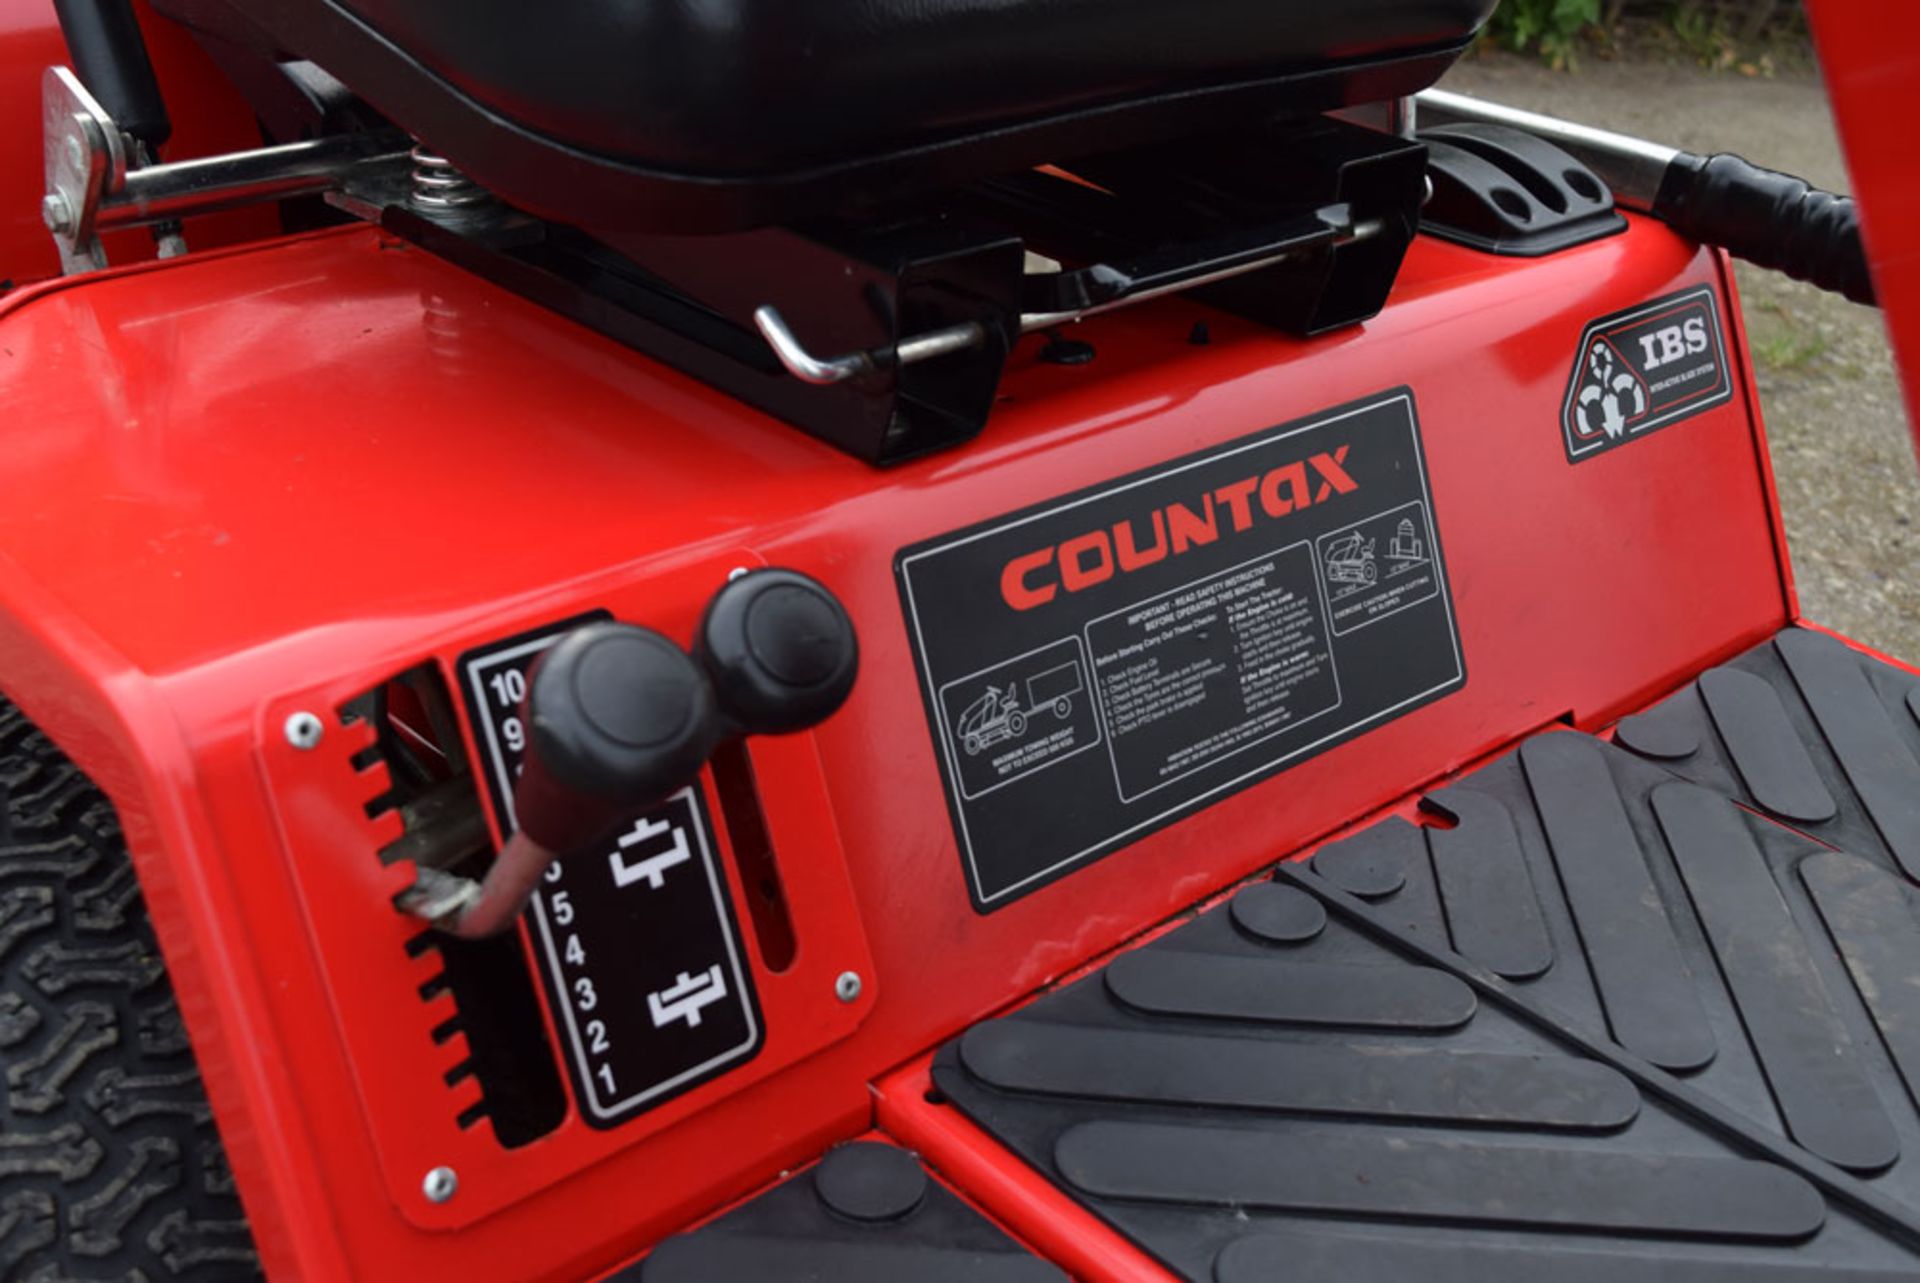 Countax C800H 44" Rear Discharge Garden Tractor With PGC - Image 3 of 7